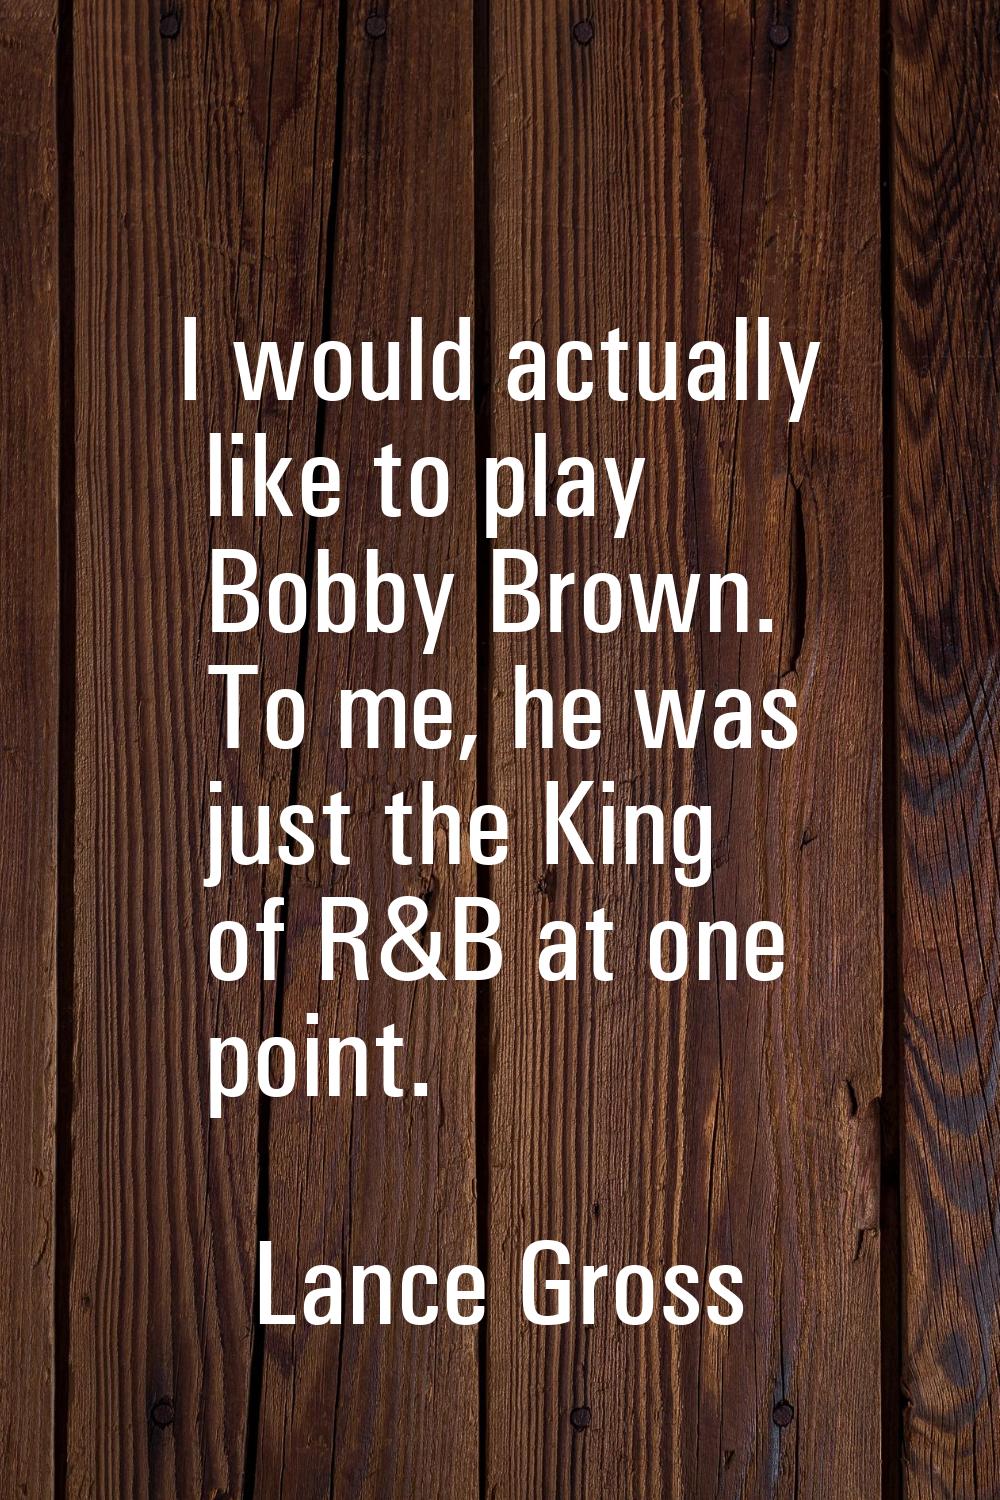 I would actually like to play Bobby Brown. To me, he was just the King of R&B at one point.